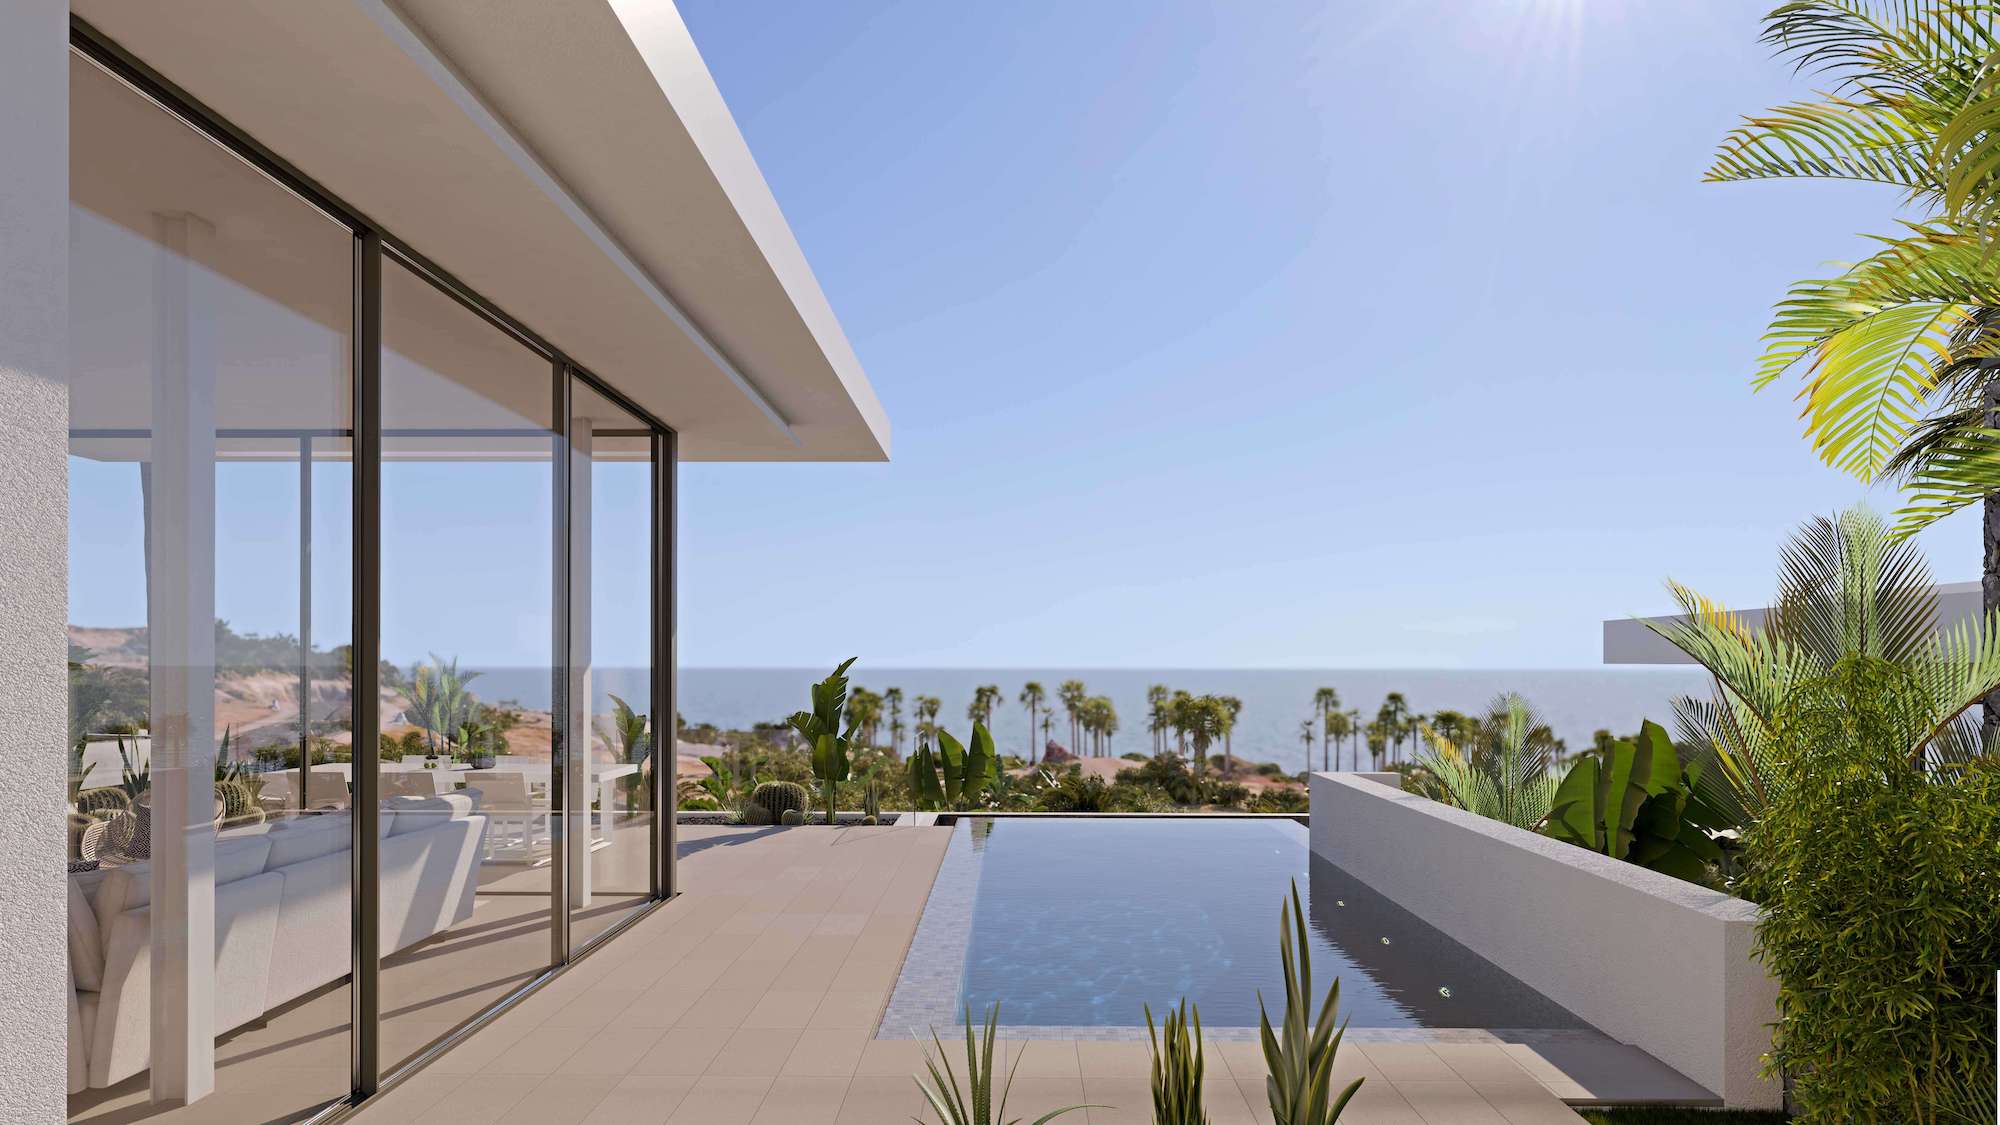 Modern villa with an infinity pool overlooking the sea